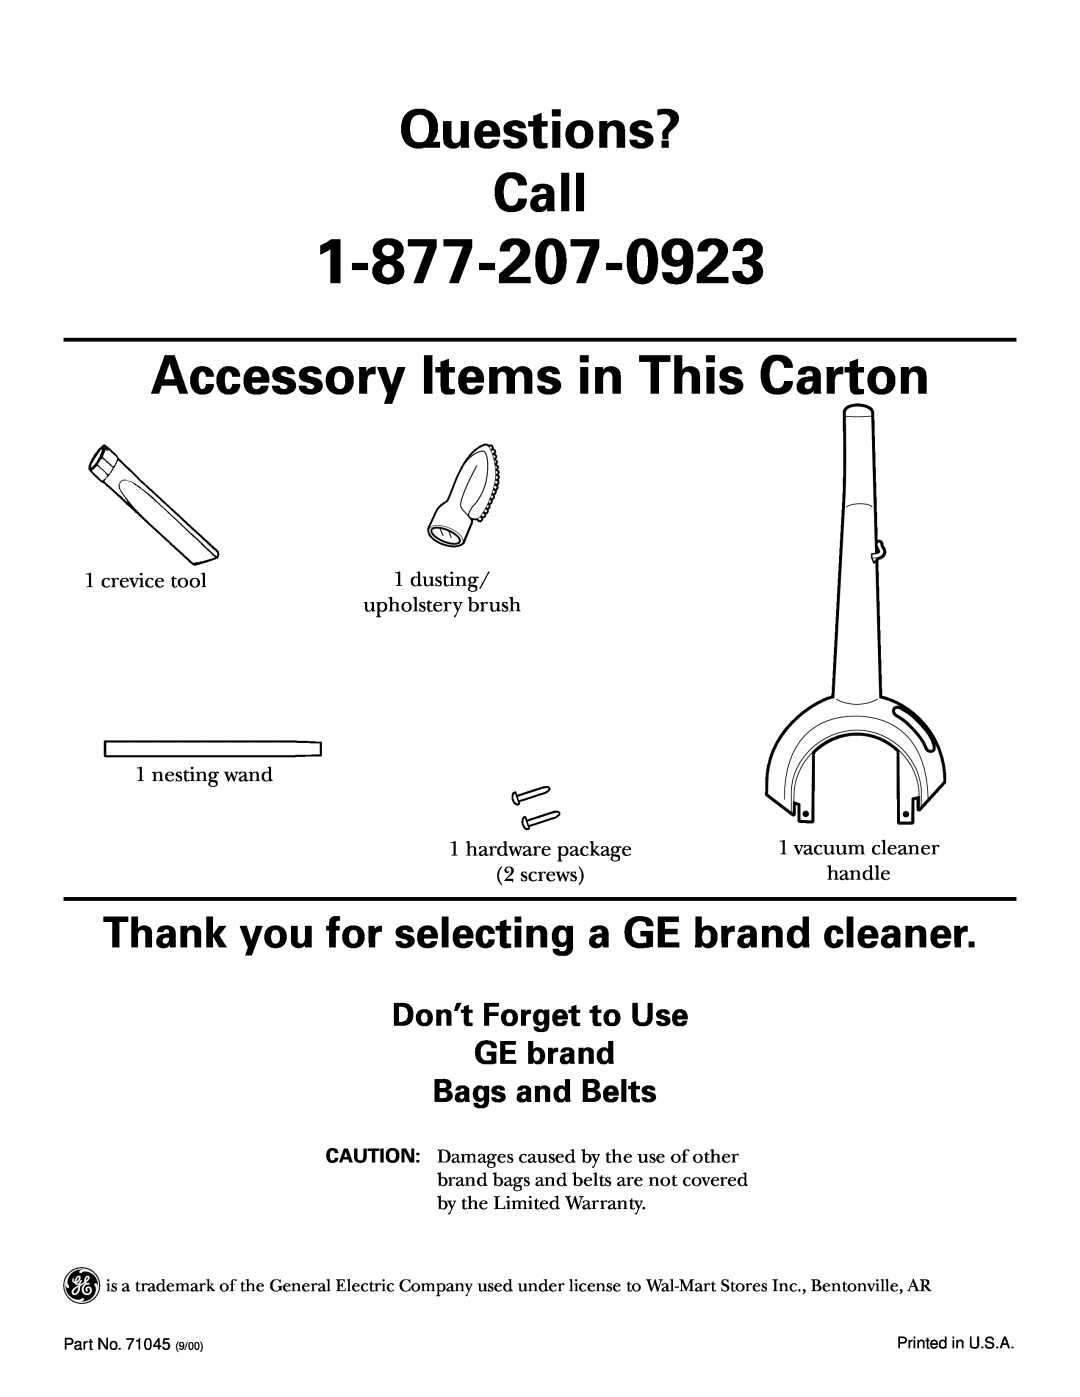 GE 71045 Questions? Call, Accessory Items in This Carton, Thank you for selecting a GE brand cleaner, crevice tool, screws 